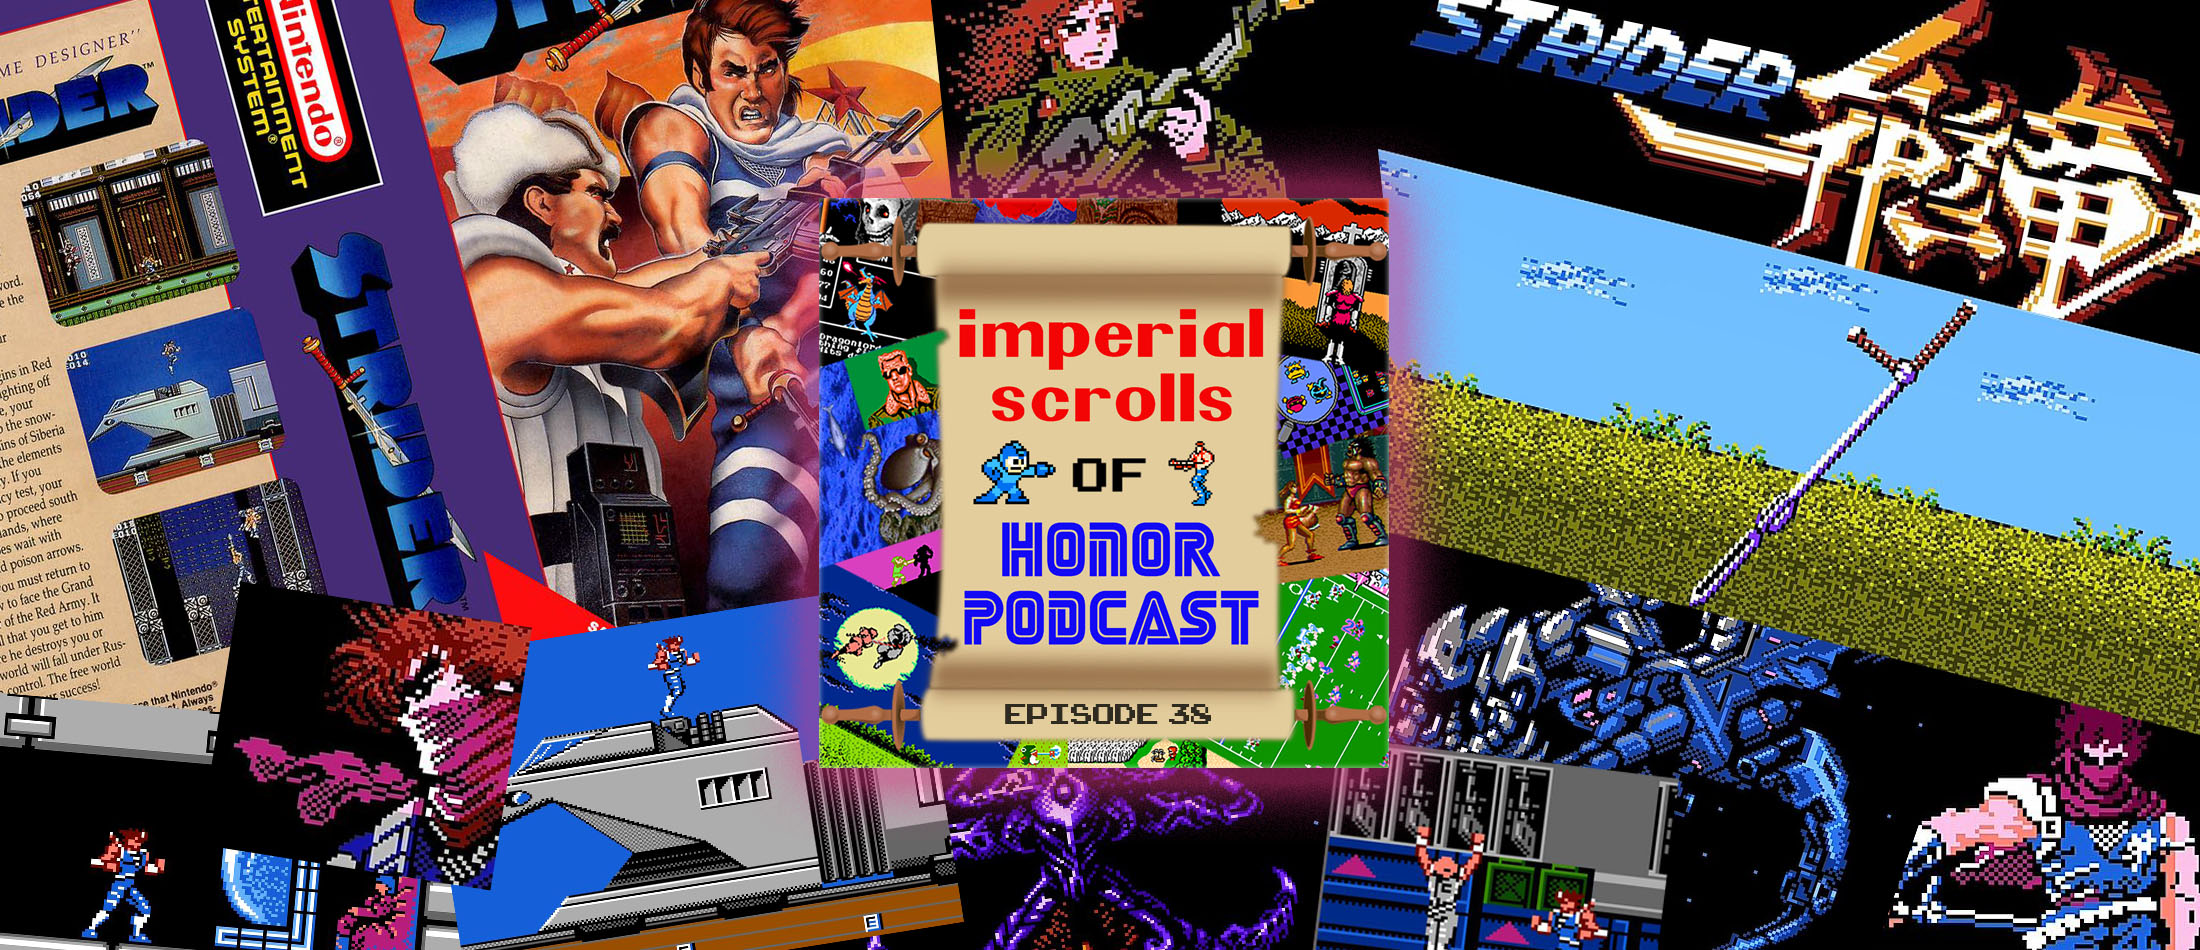 The Imperial Scrolls of Honor Podcast - Ep 38 - Strider (NES)